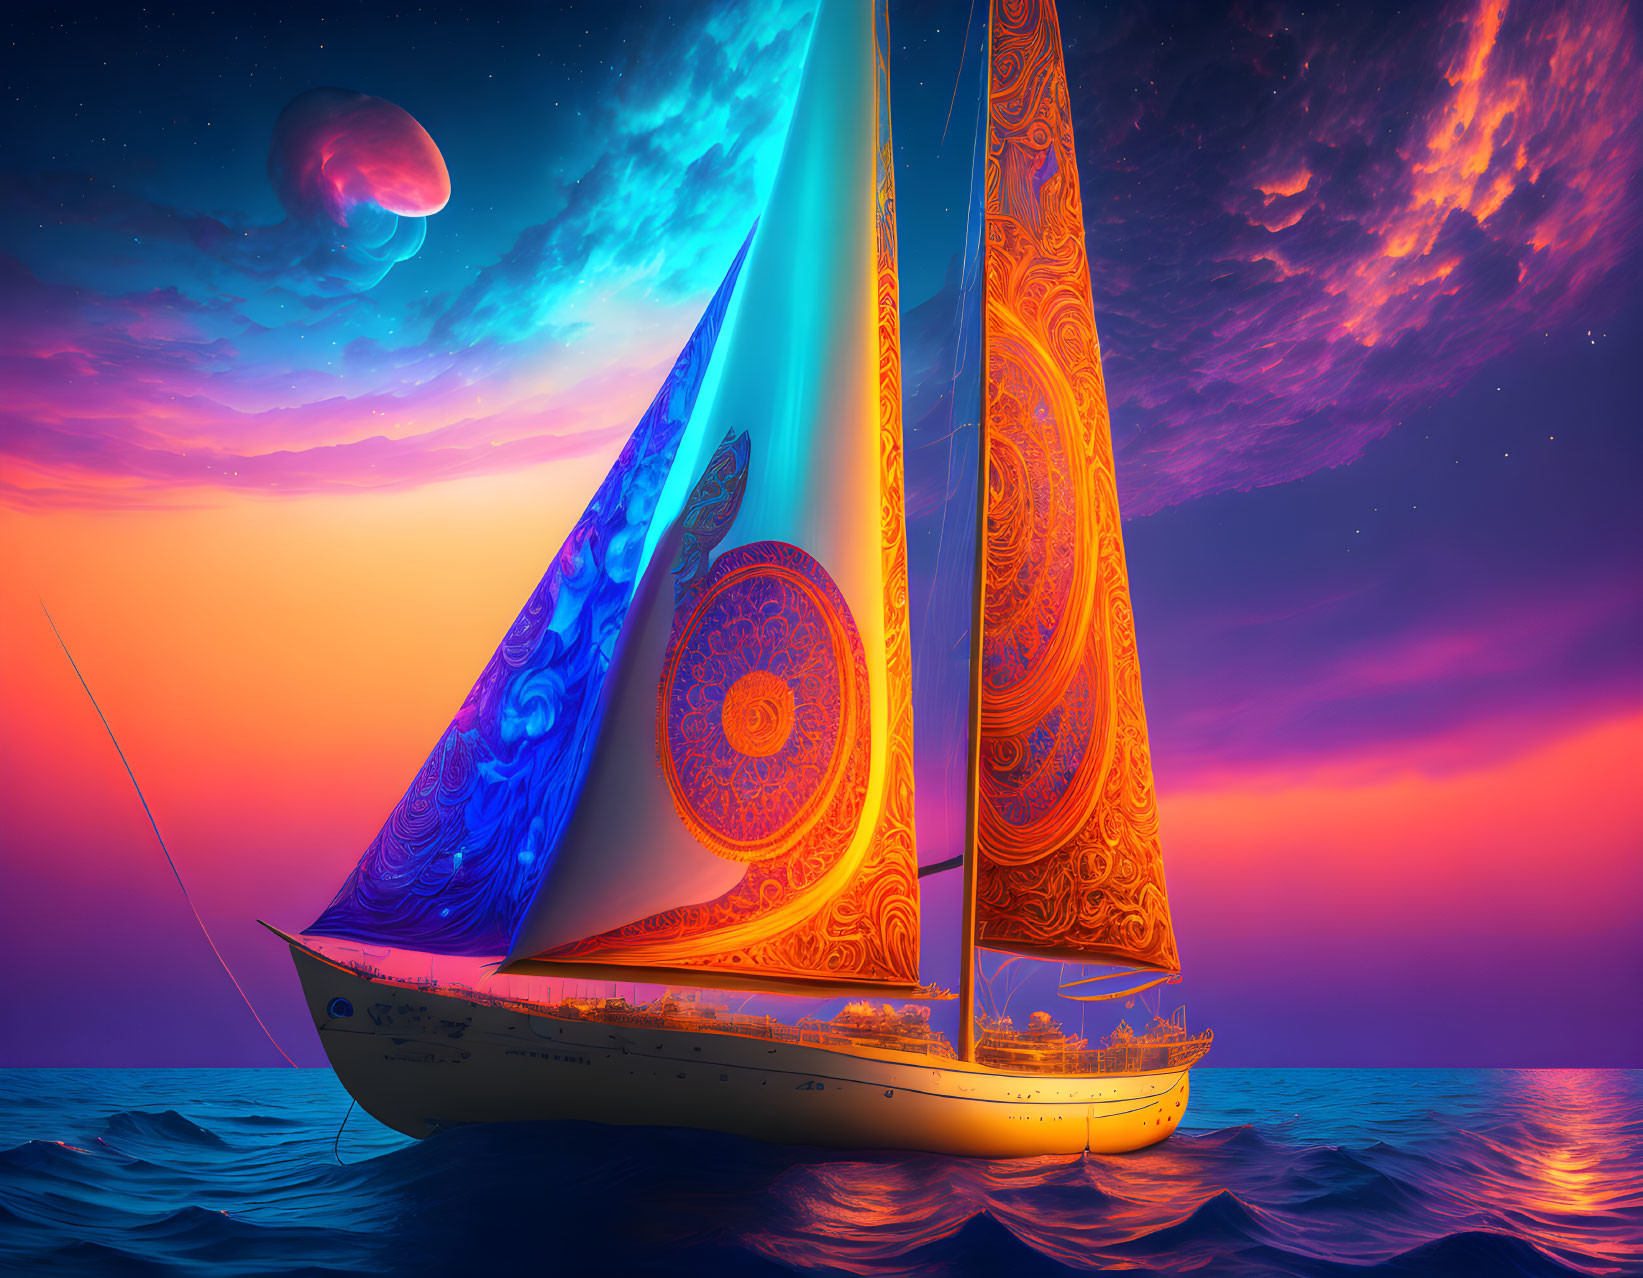 The Astral Sailboat